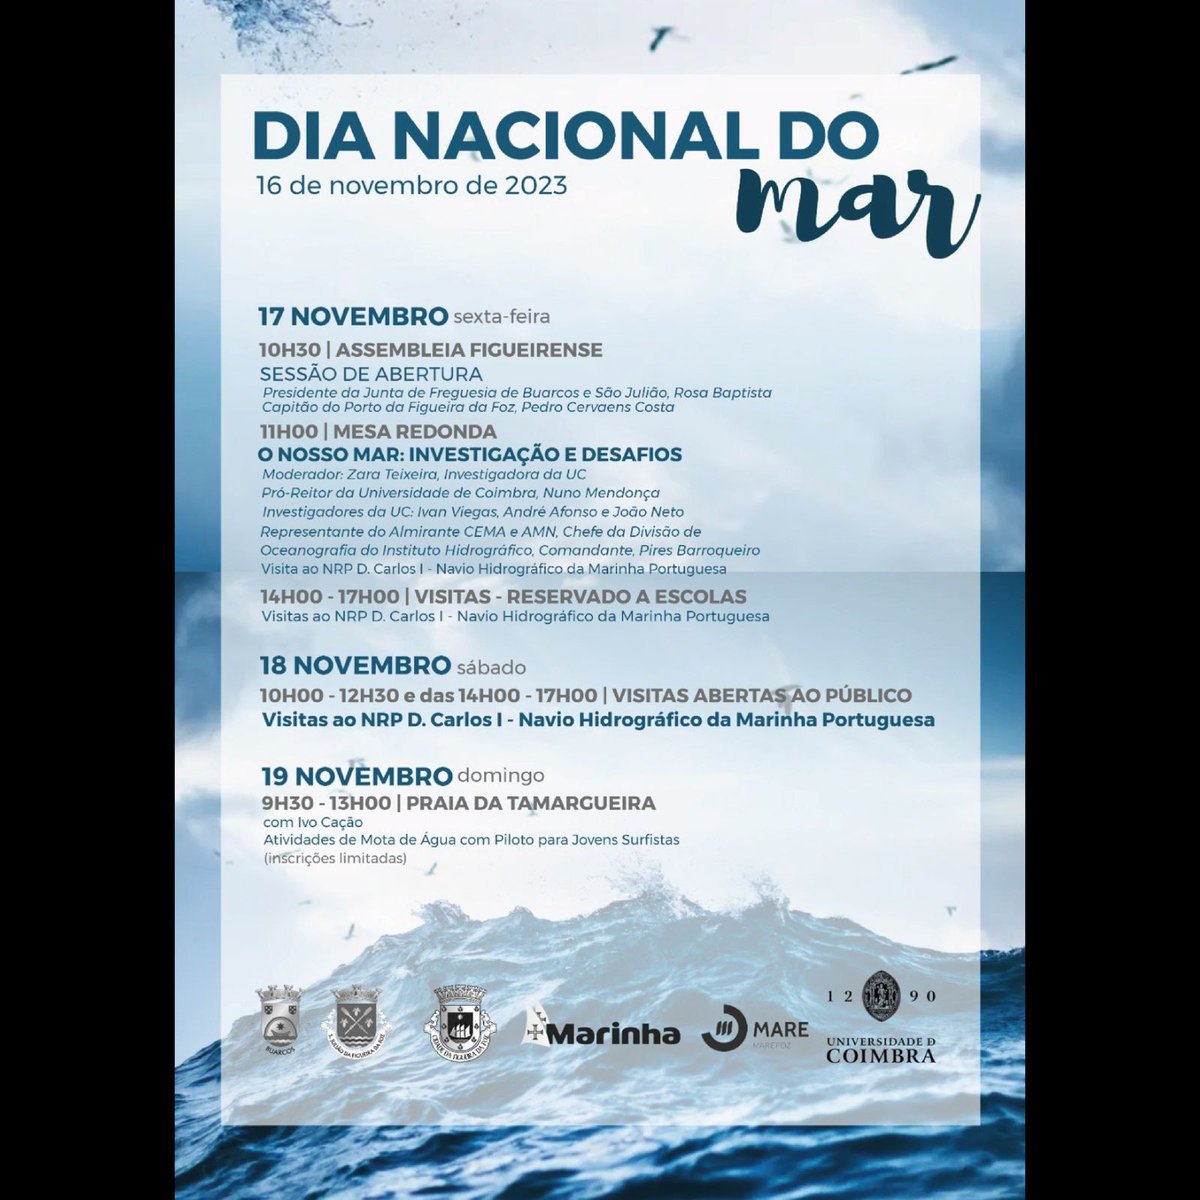 Researchers from the @marineresearchL @IvanViegasLab will be taking part in the round table 'Our Sea: Research and Challenges' in Figueira da Foz today. The activity is being held as part of the celebrations for the National Day of the Sea, which took place yesterday 16 November